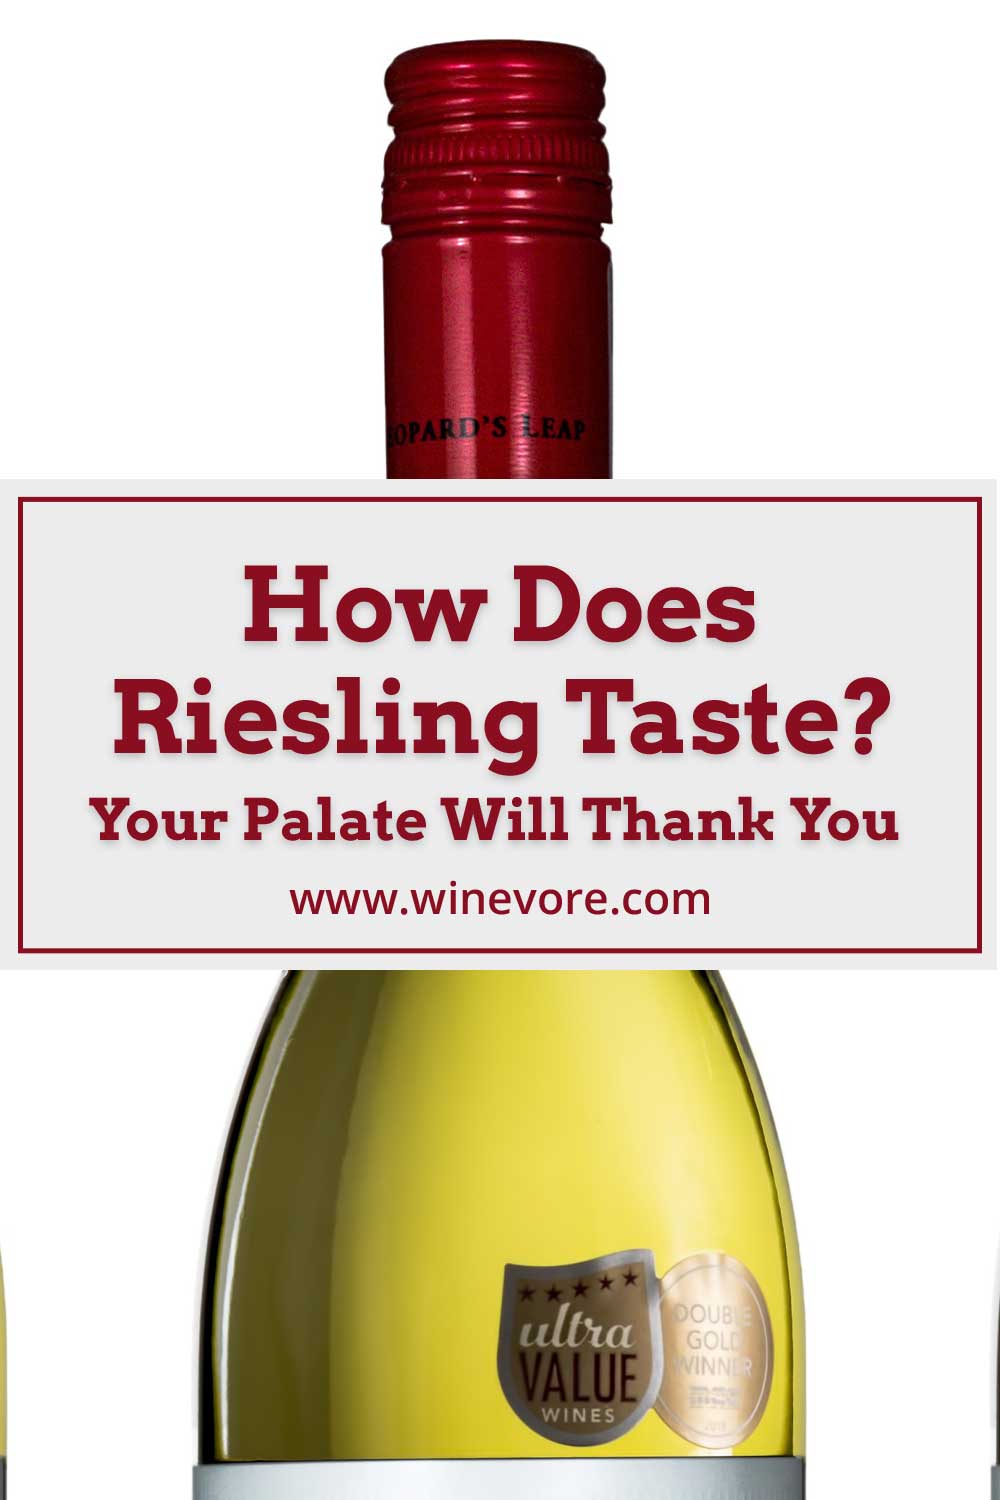 A sealed white wine bottle in front of white surface - How Does Riesling Taste? Your Palate Will Thank You.